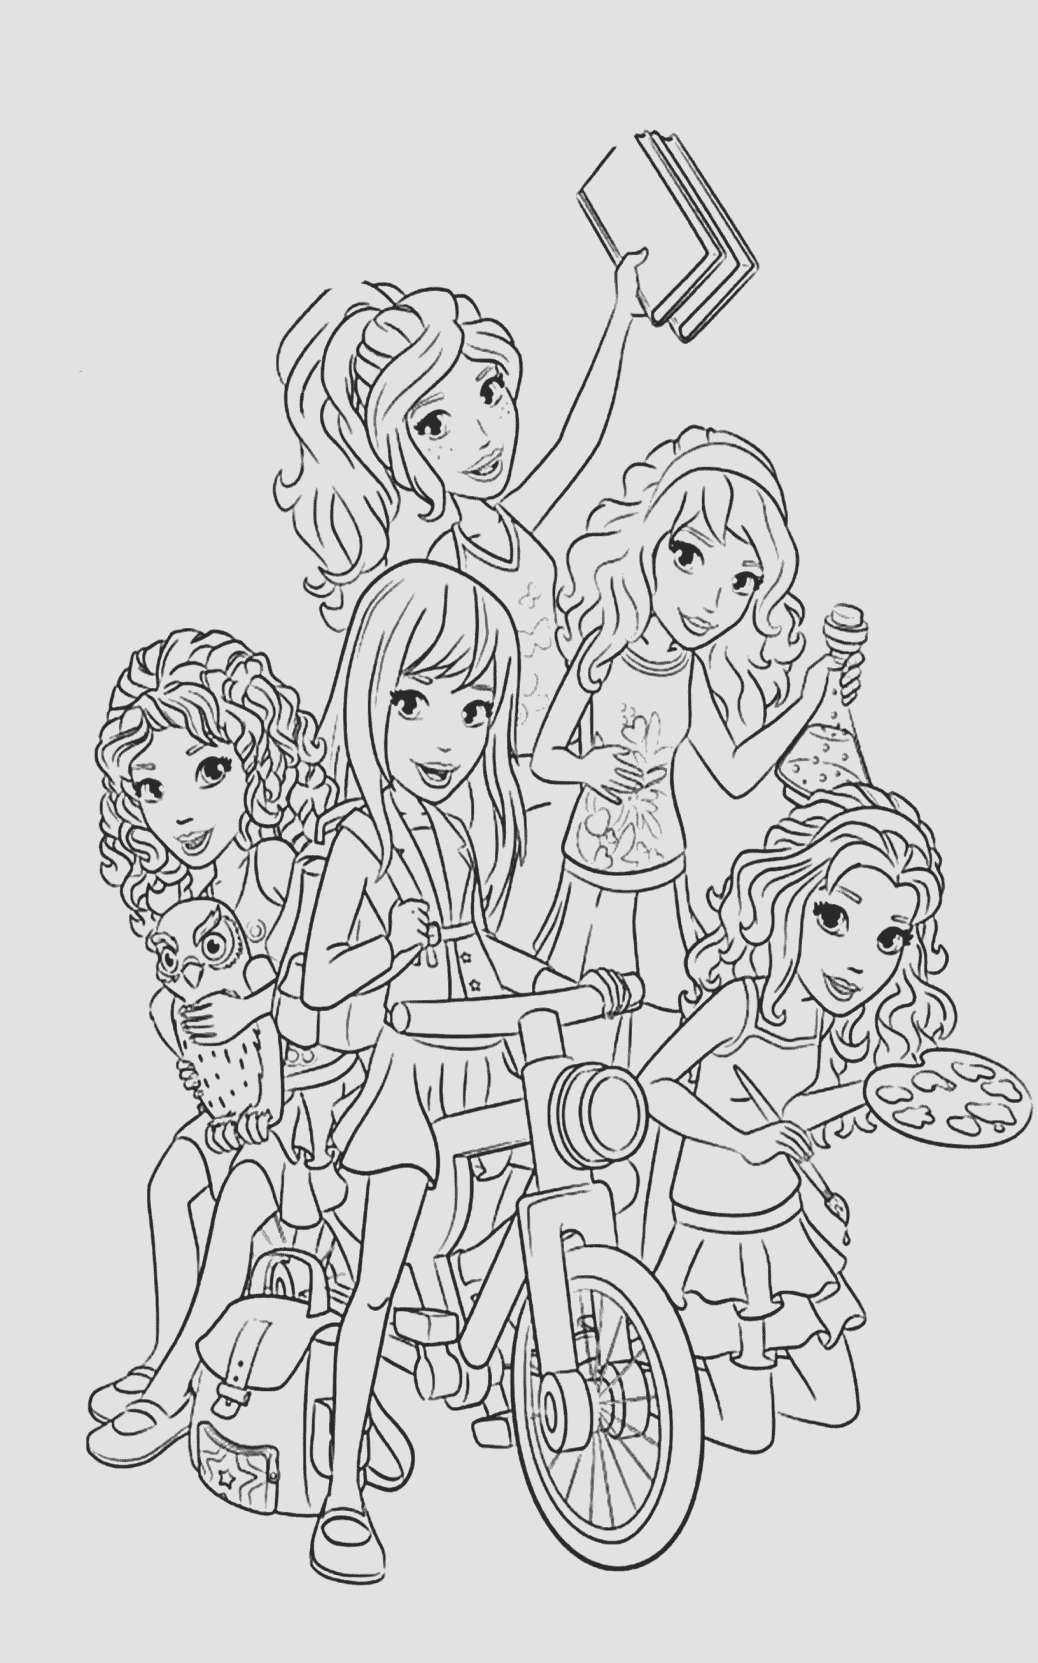 Lego Friends Printable Coloring Pages Wonder Woman Coloring Sheet Lego Friends All Coloring Page For Kids